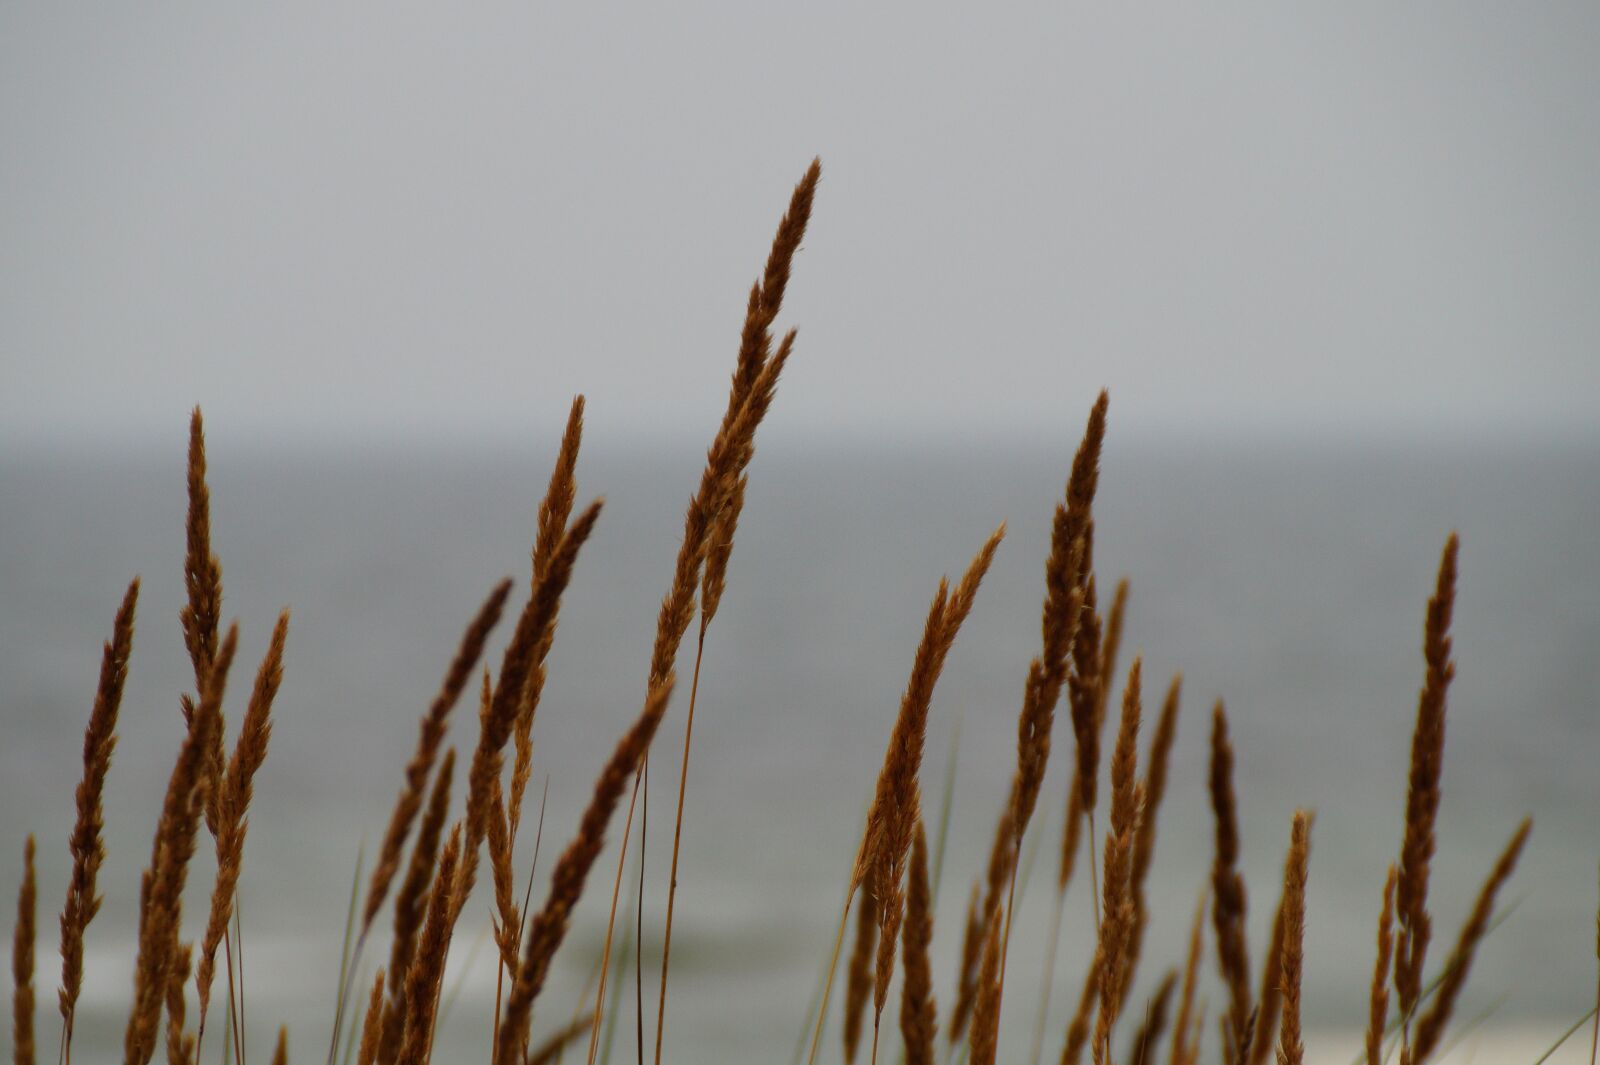 Sony SLT-A58 + Sony DT 18-200mm F3.5-6.3 sample photo. Grasses, wind, nature photography